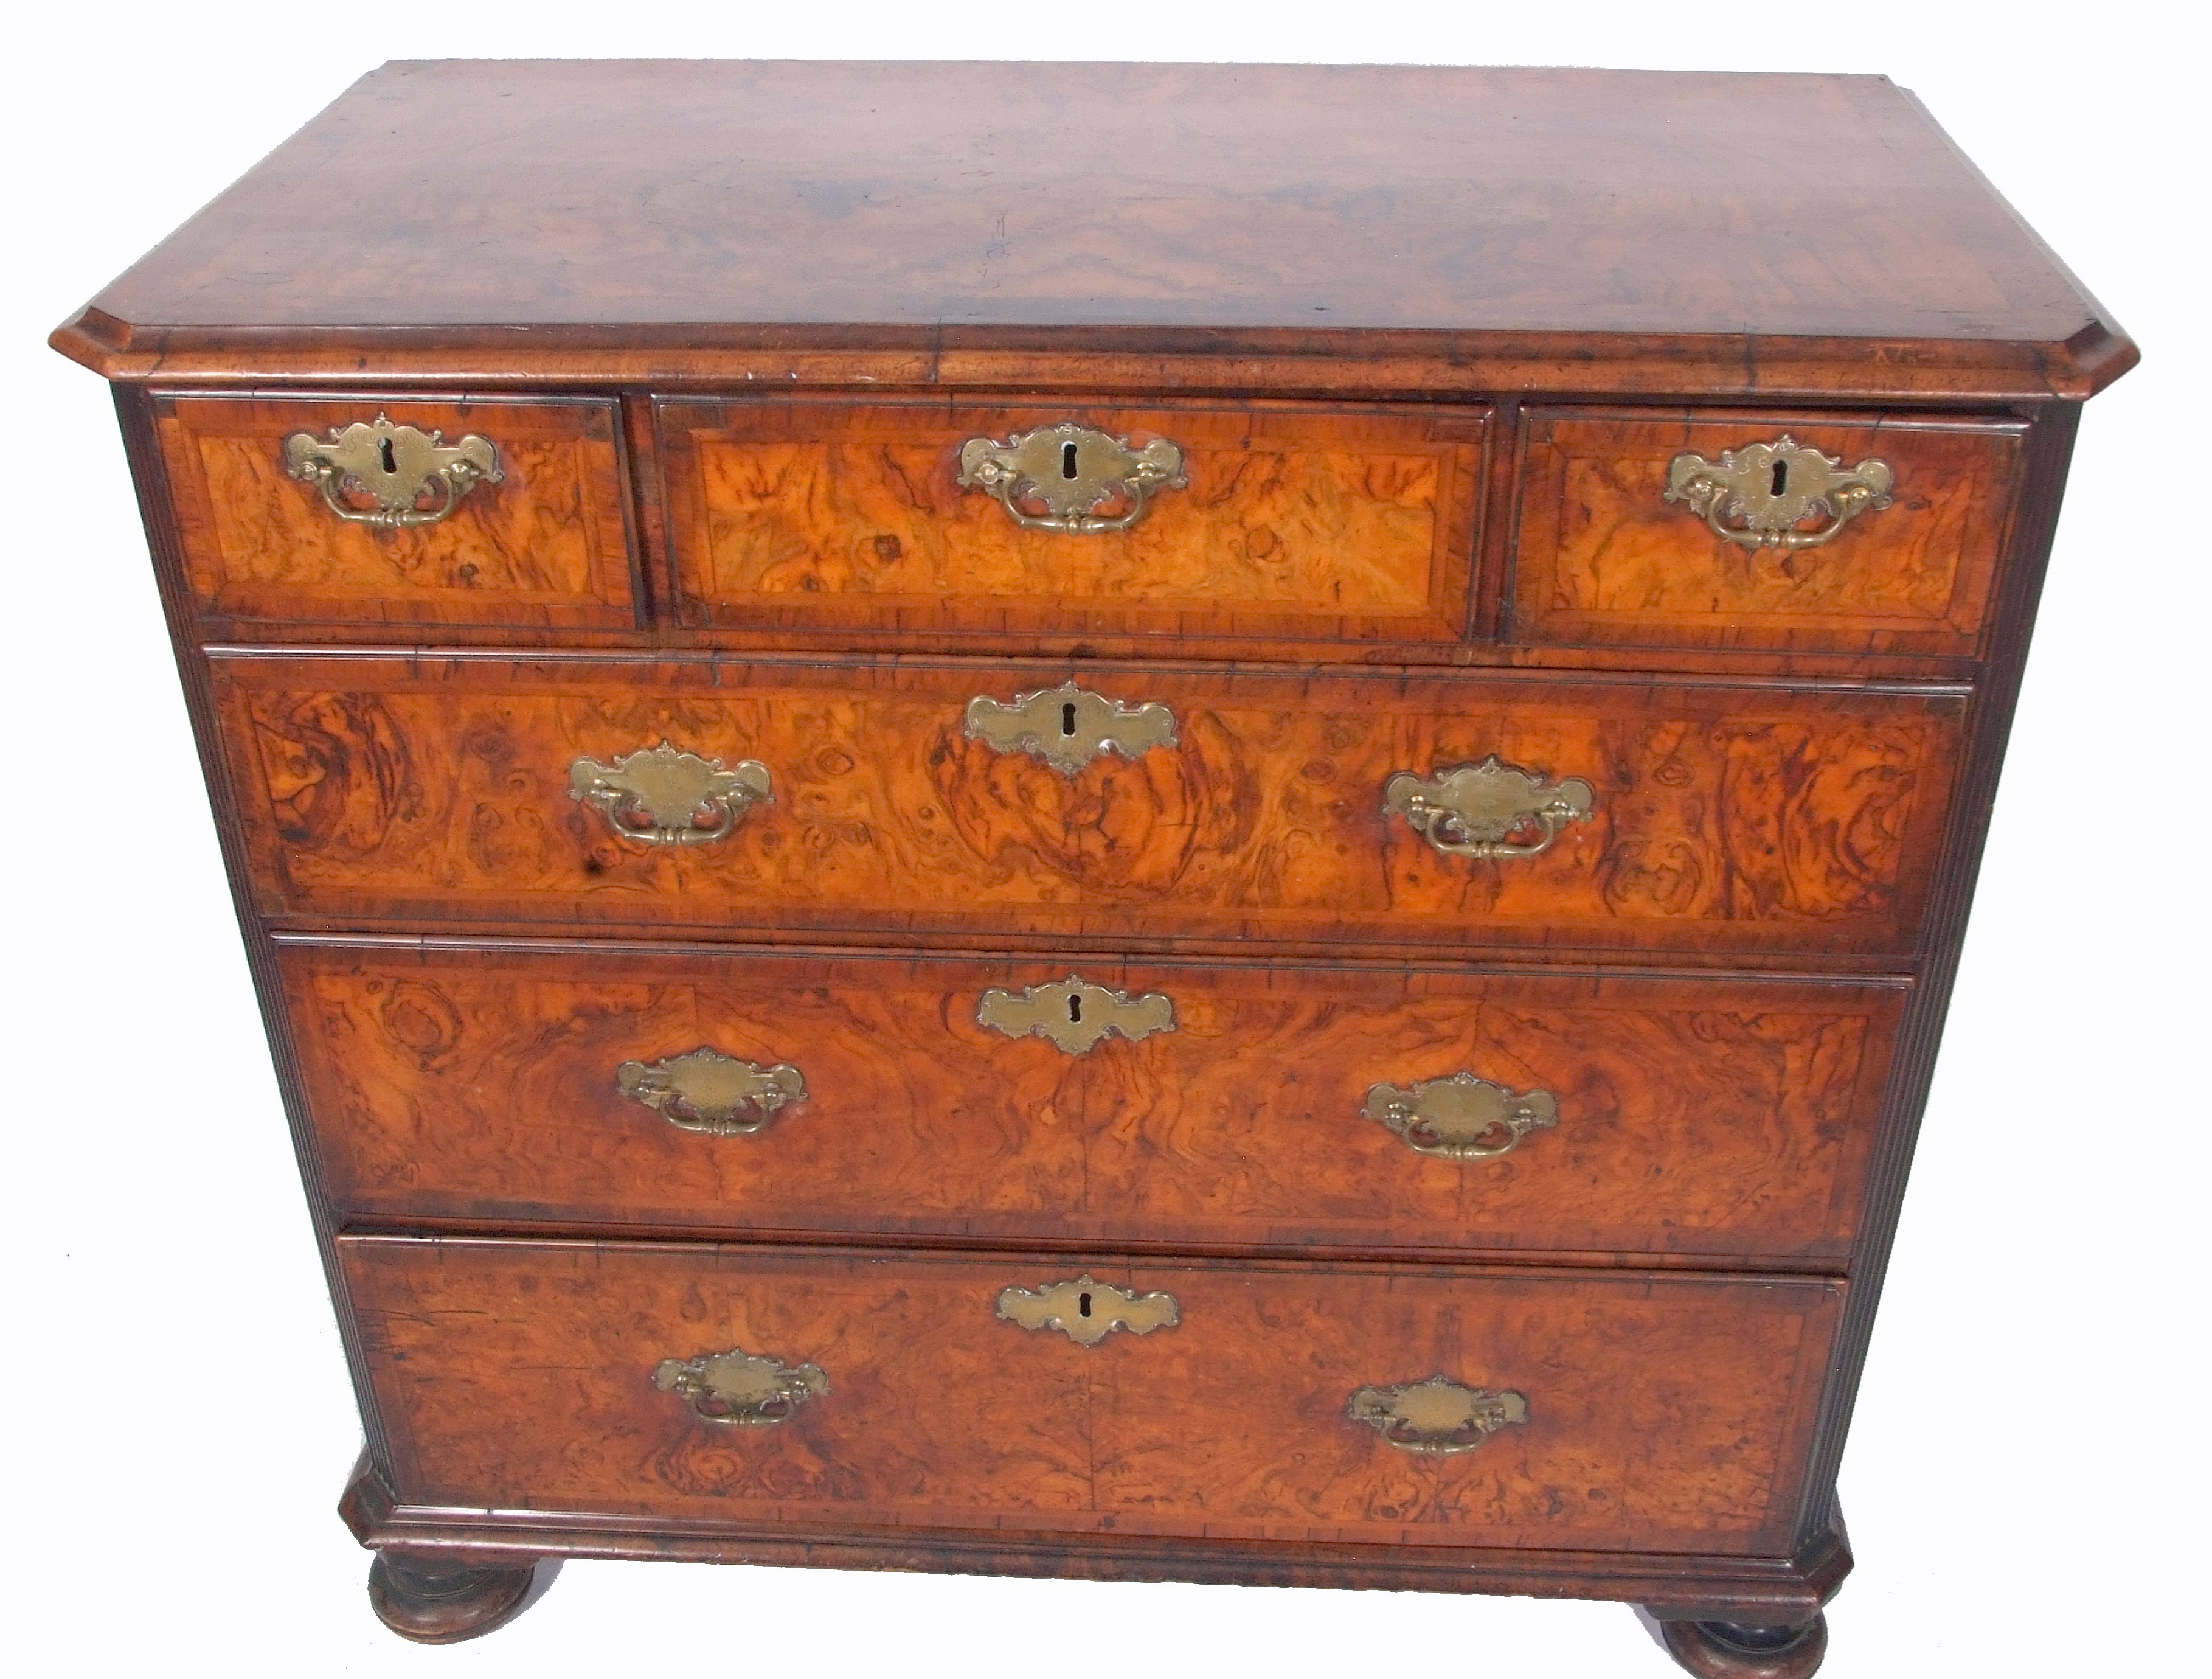 Furnishing A Period Home? Head For The Saleroom